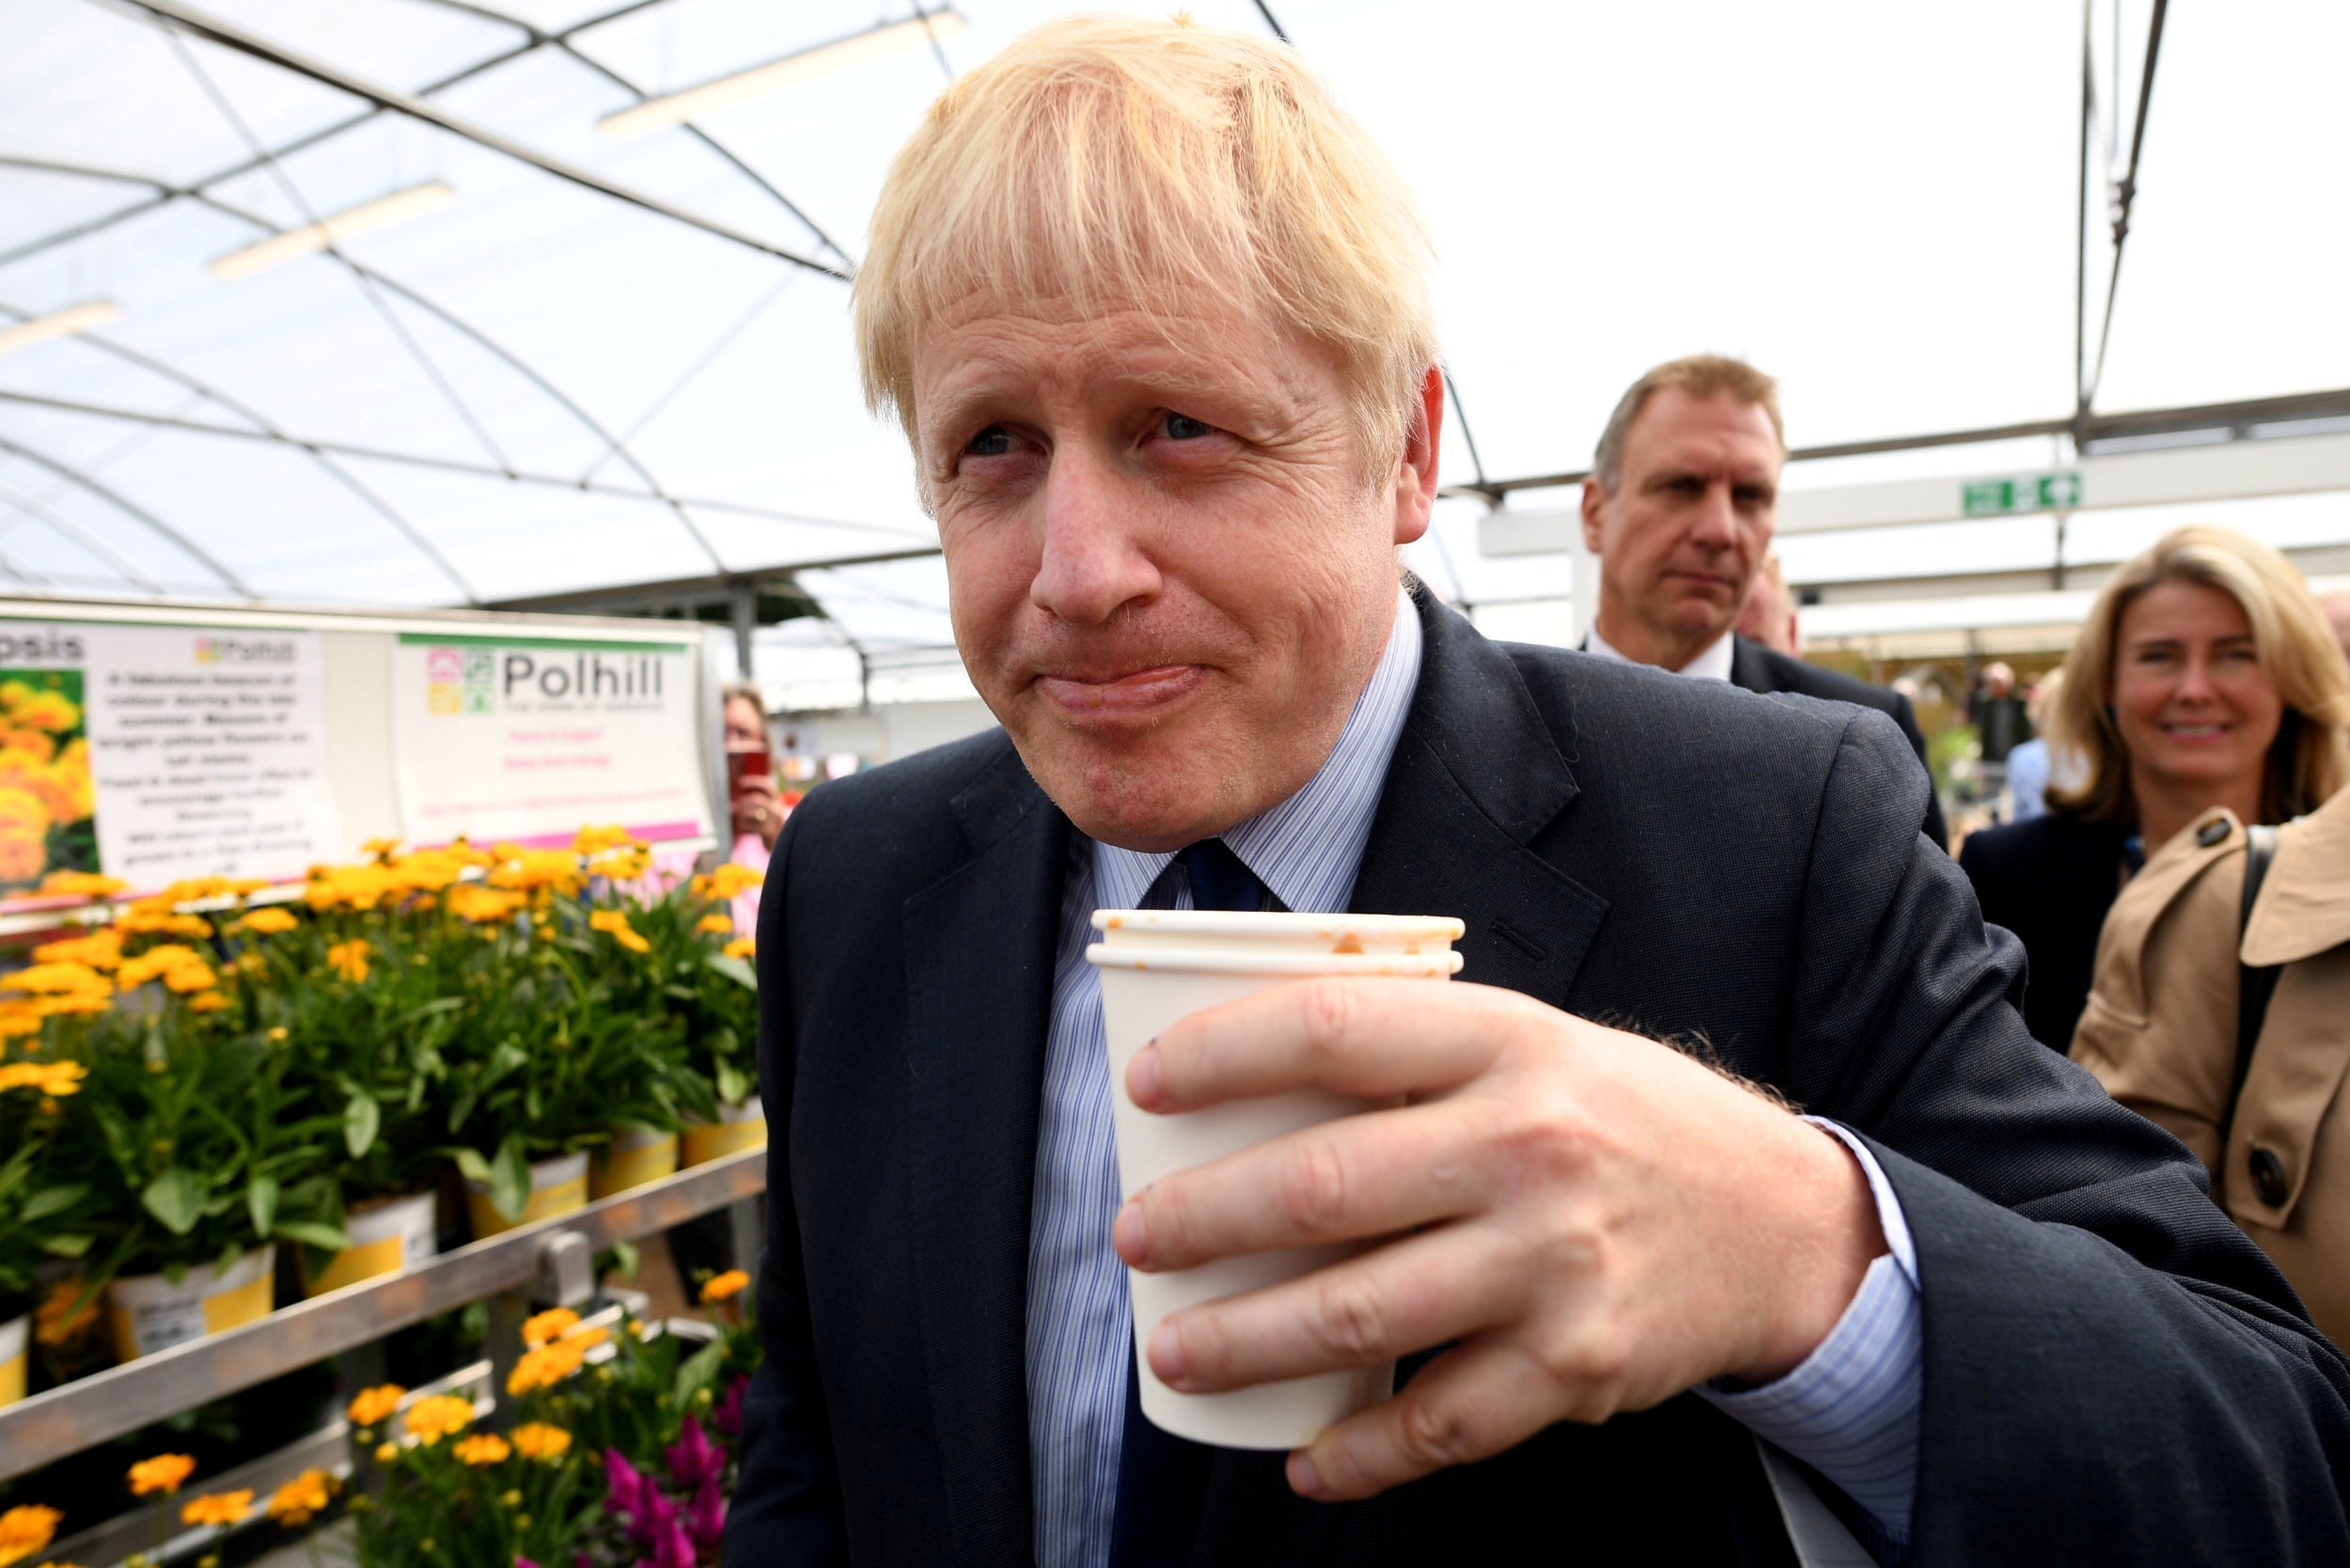 Boris Johnson ‘denied’ full access to intelligence by Downing St while foreign secretary